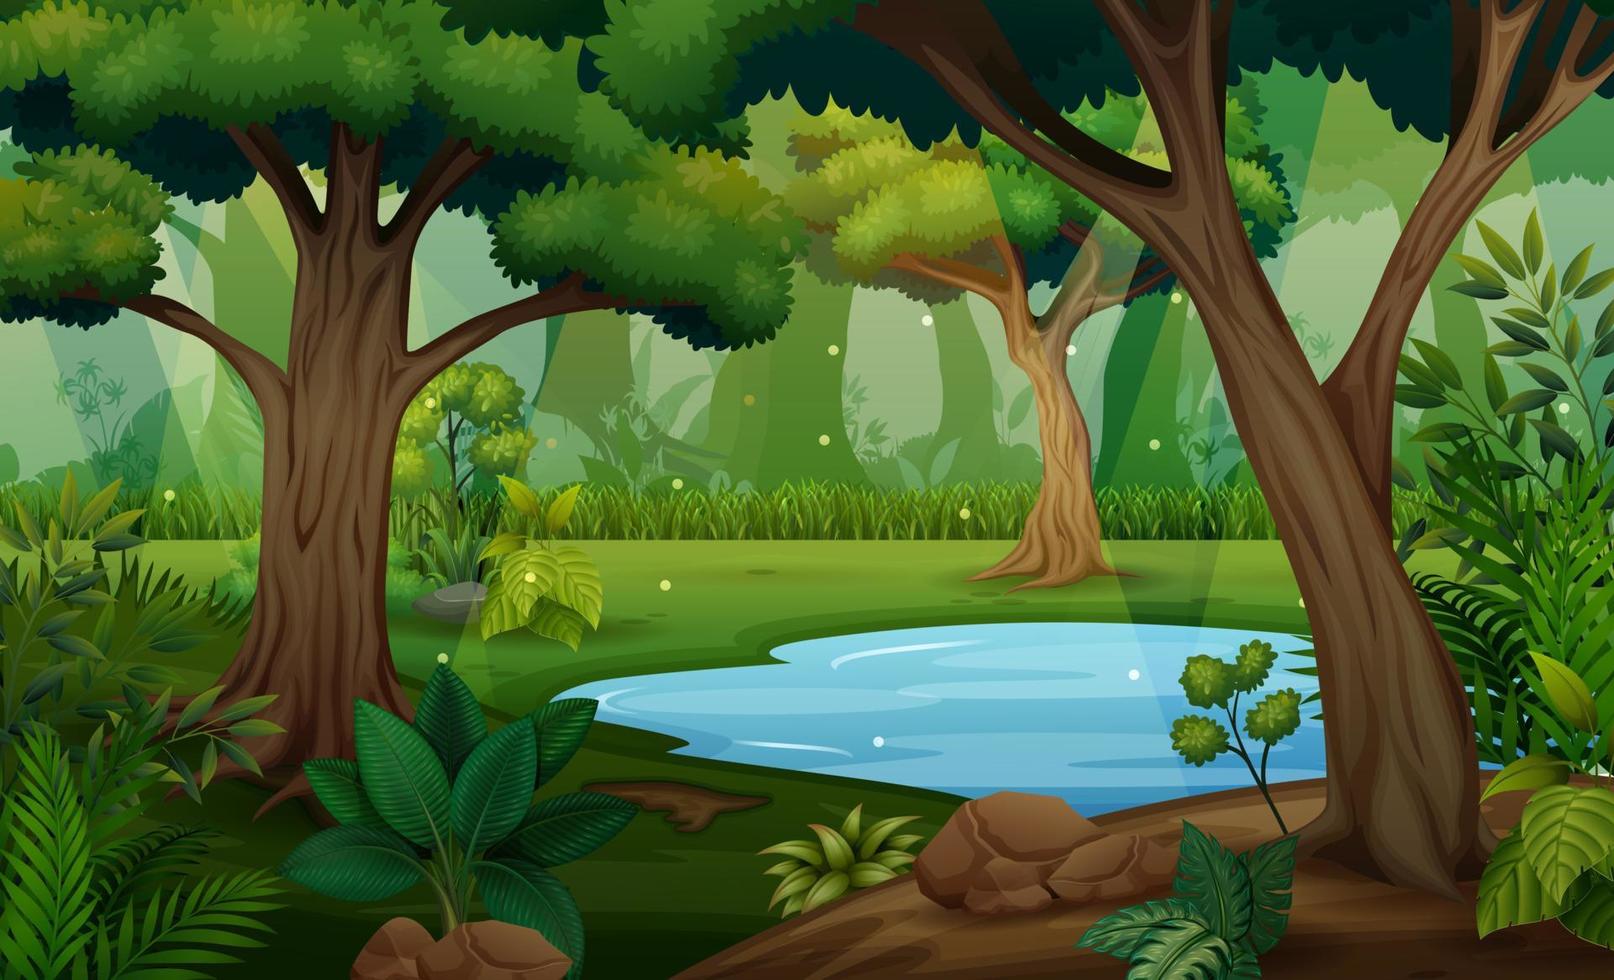 Forest scene with trees and pond illustration vector